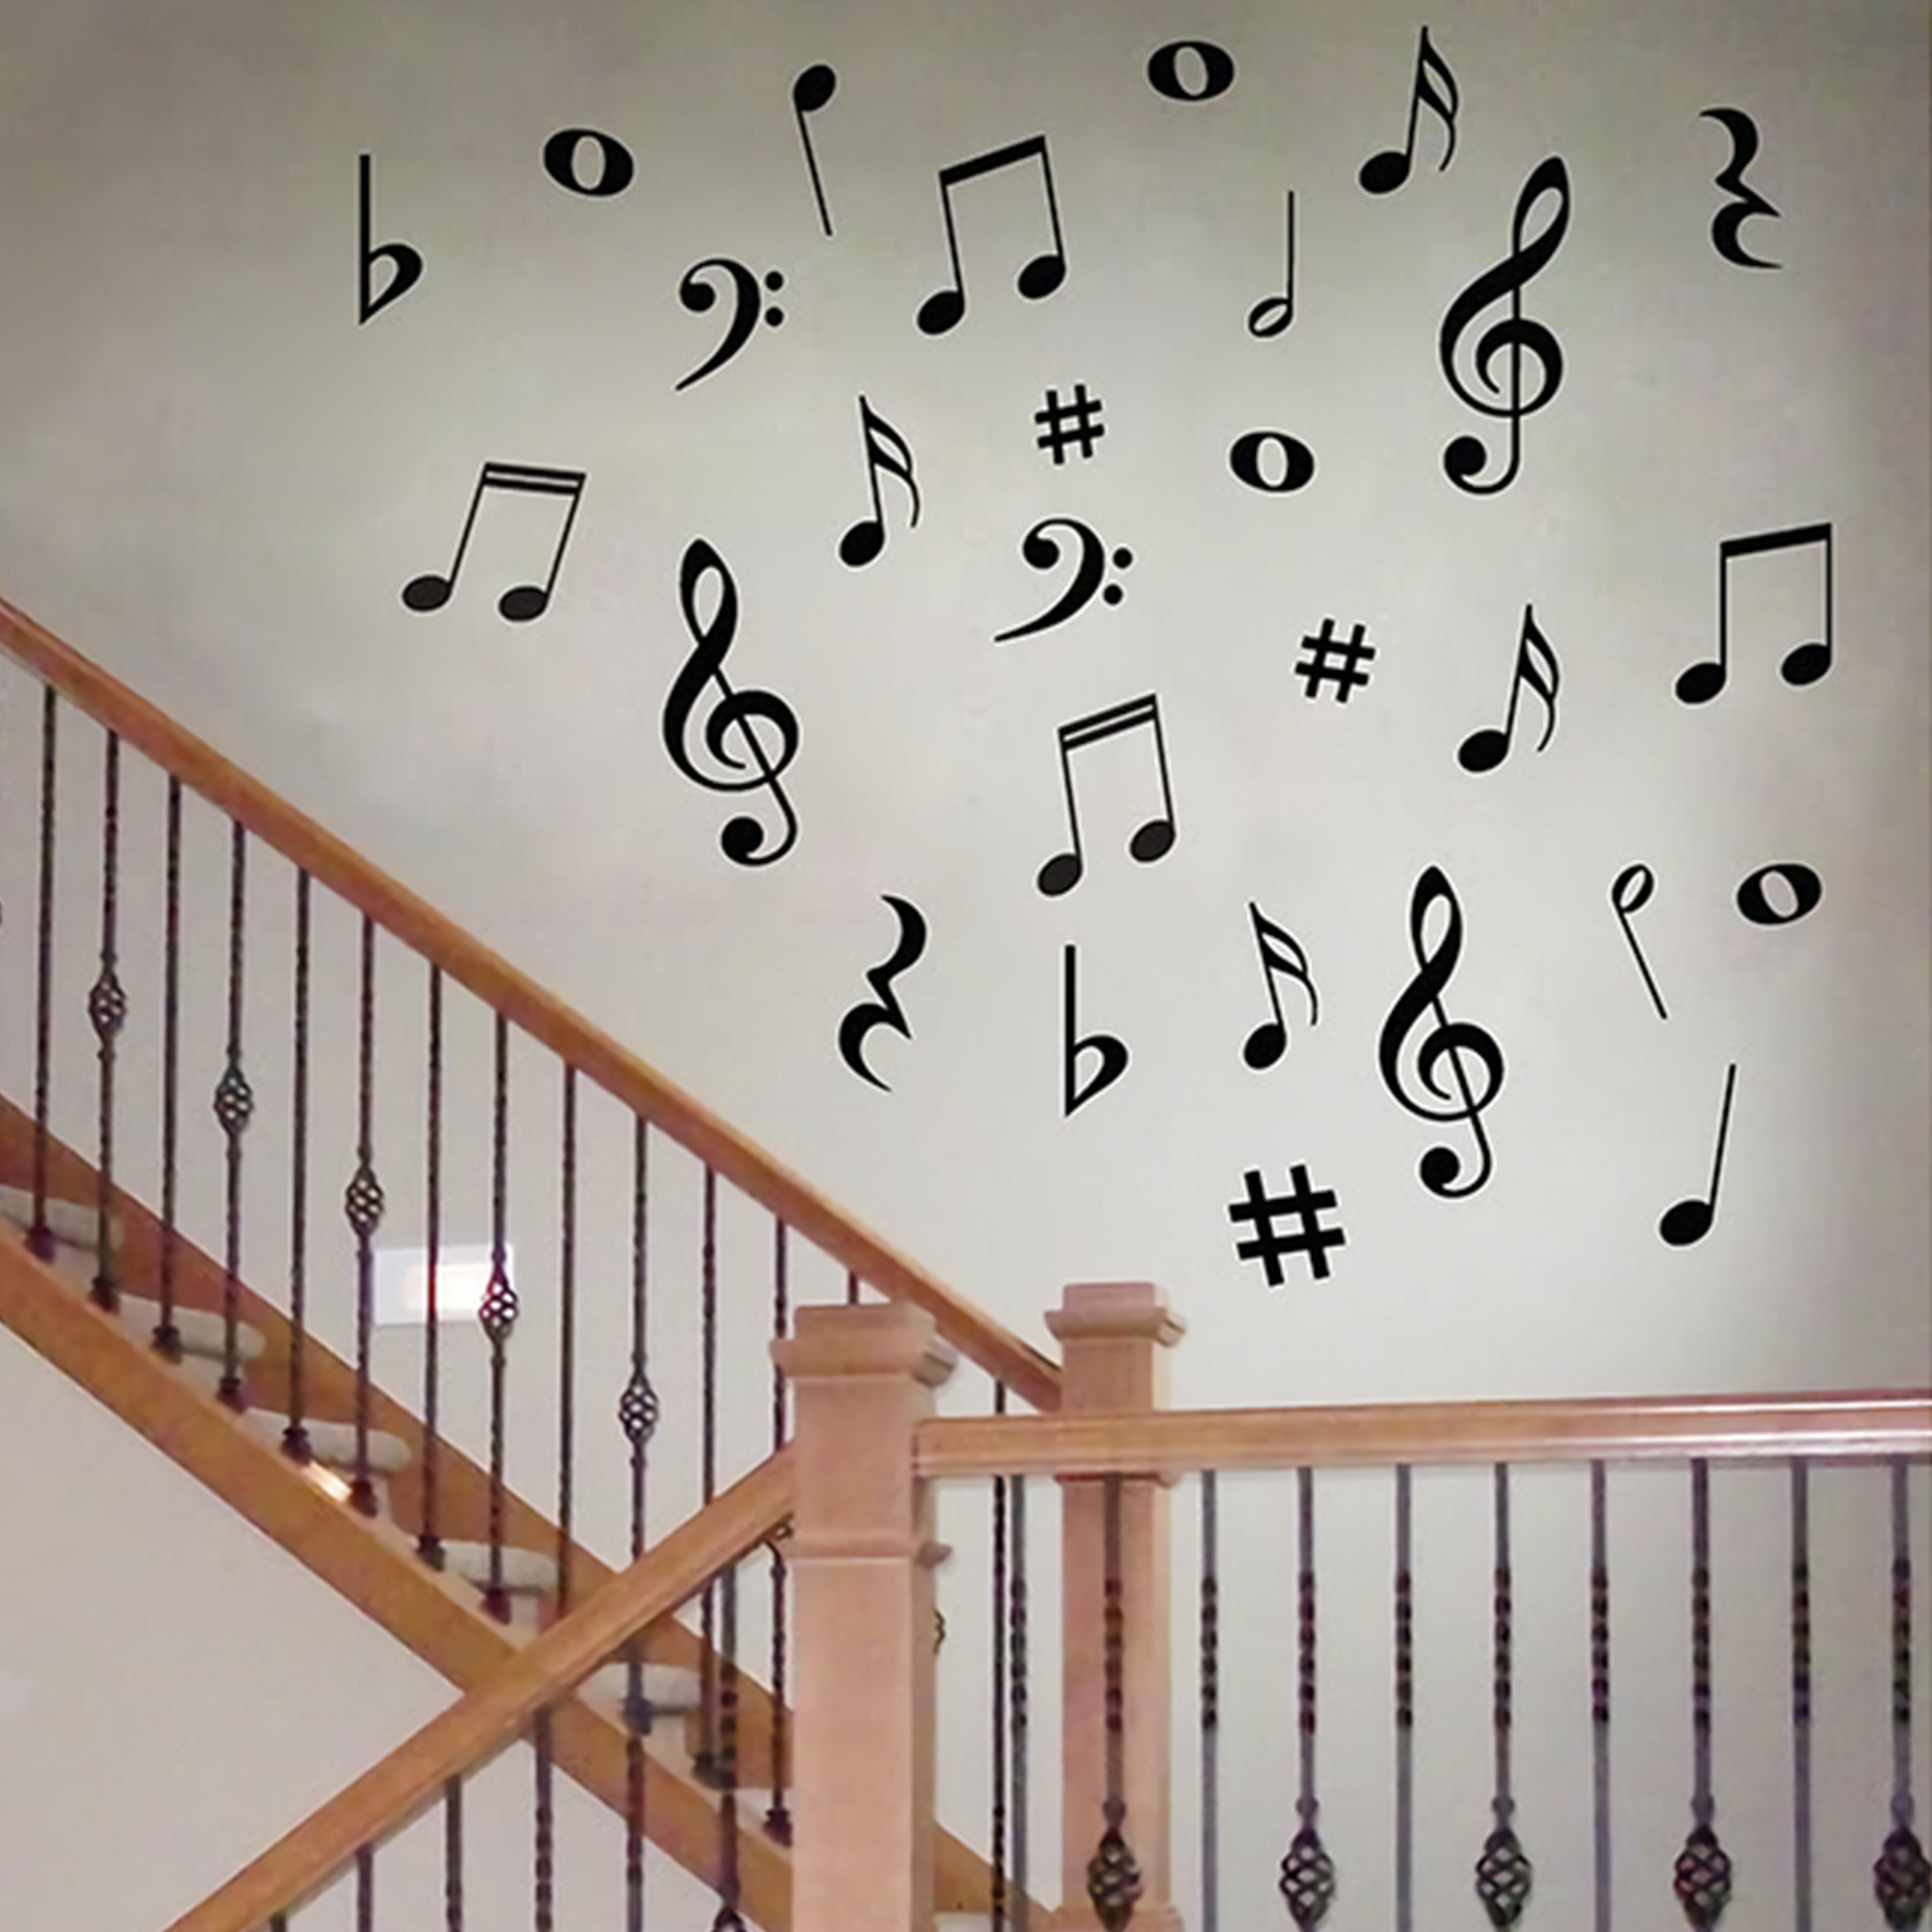 Music Notation Wall Stickers | Home Decorations | Our Store